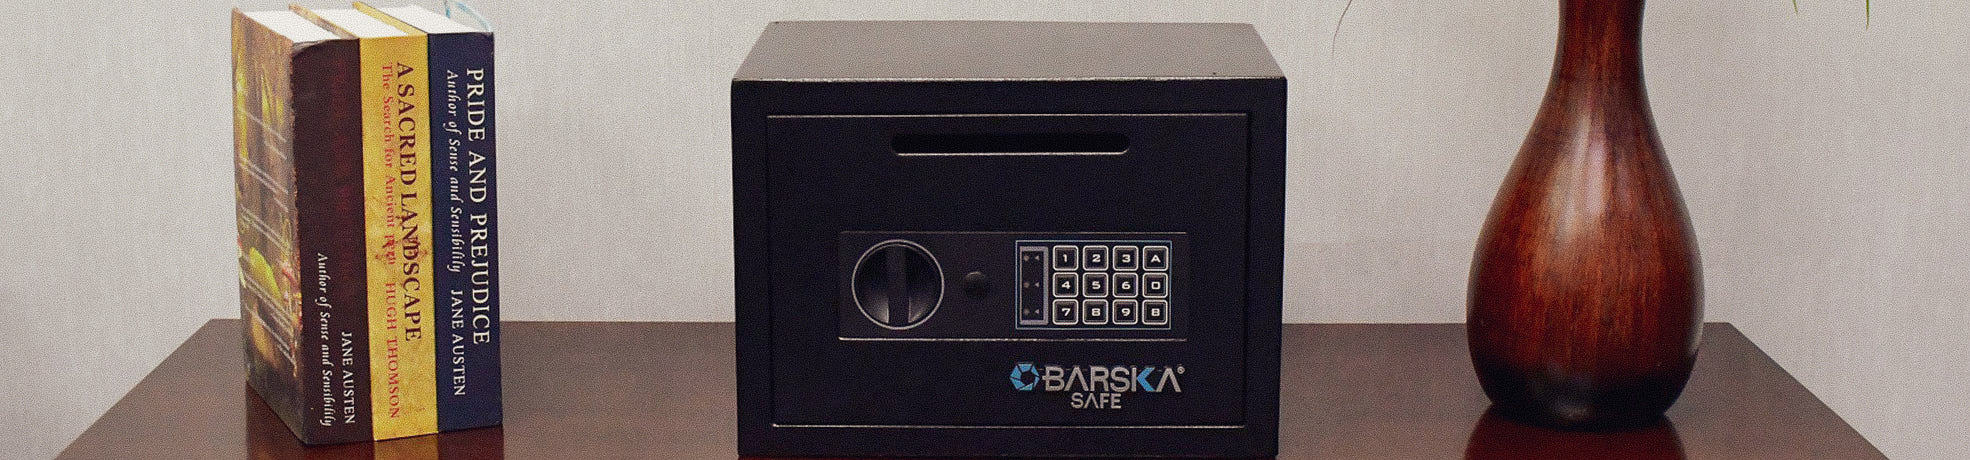 Security Safes | All Security Equipment